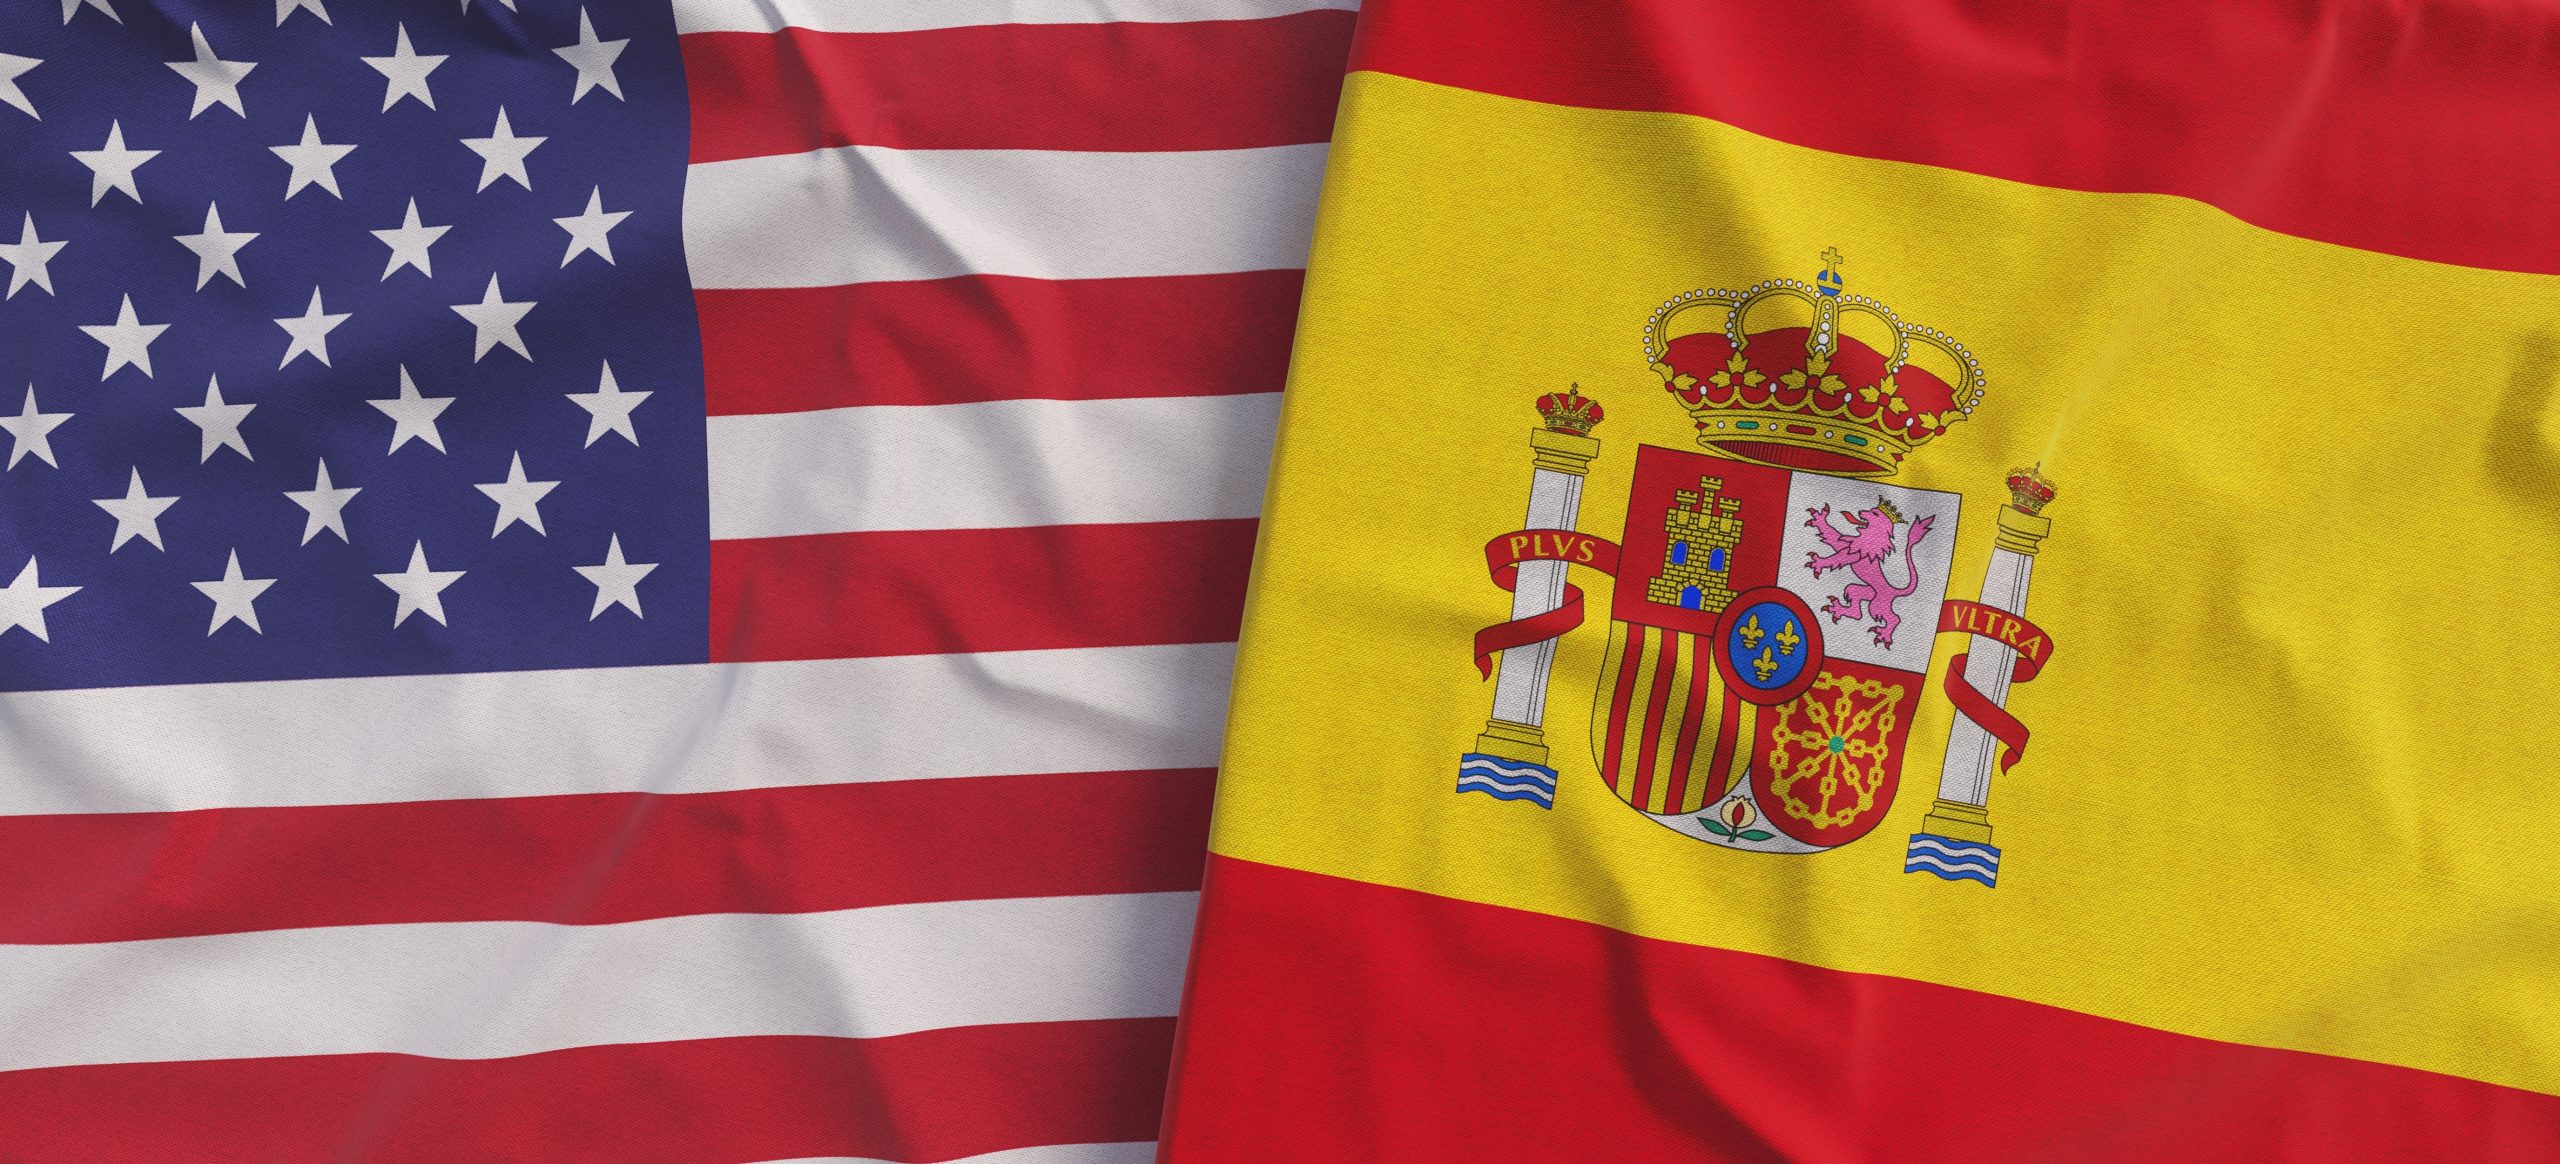 Flags,Of,The,Usa,And,Spain.,Linen,Flags,Close-up.,Flag